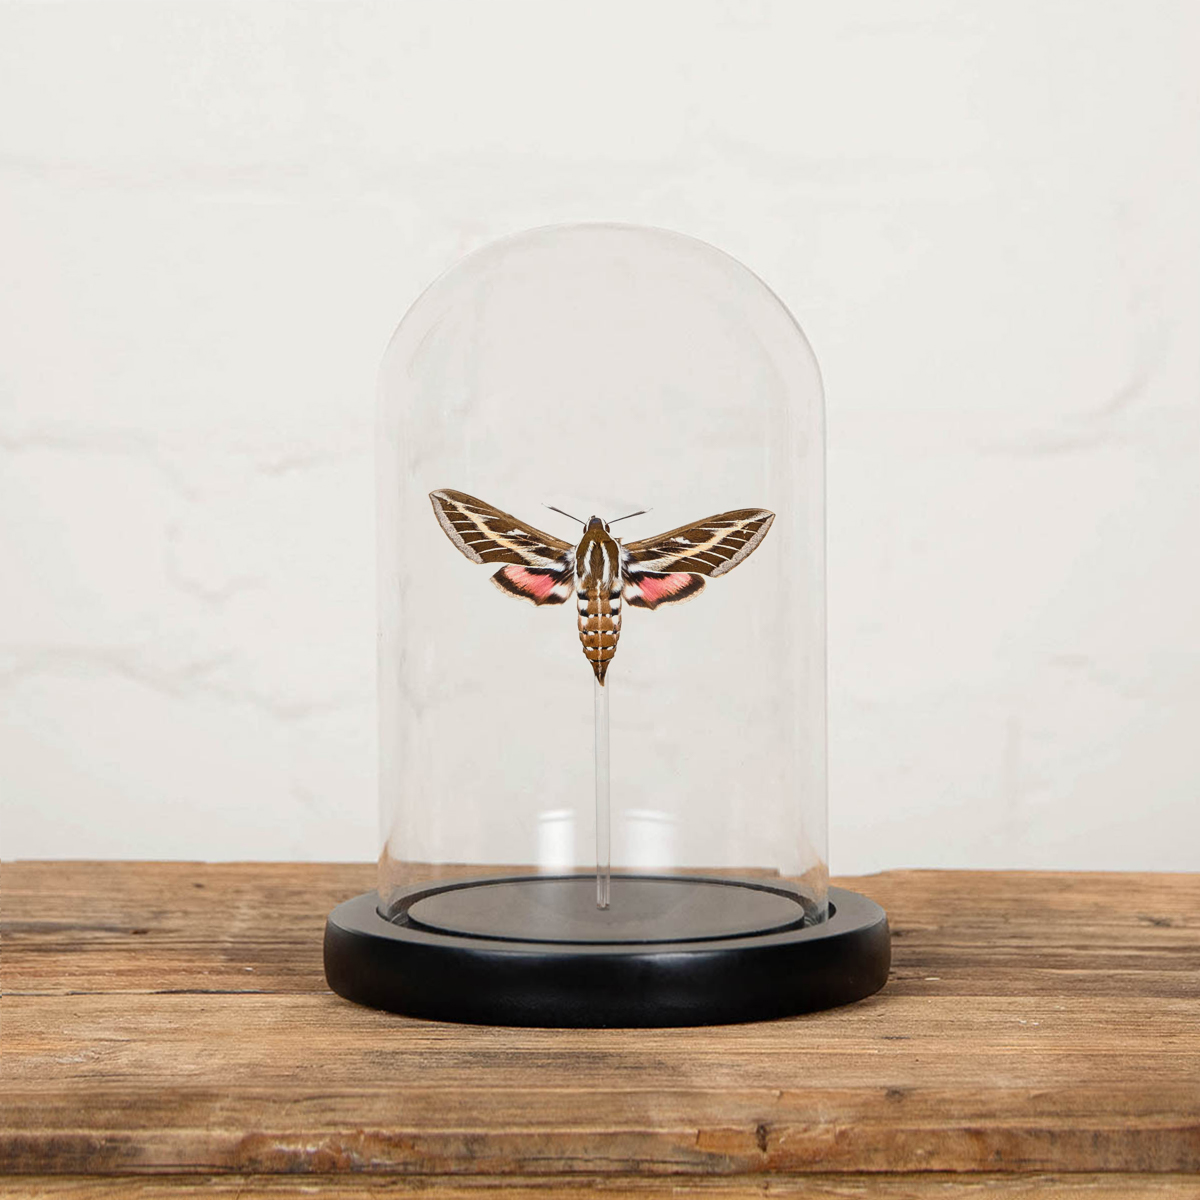 Minibeast Striped Hawk-Moth in Glass Dome with Wooden Base (Hyles livornica)